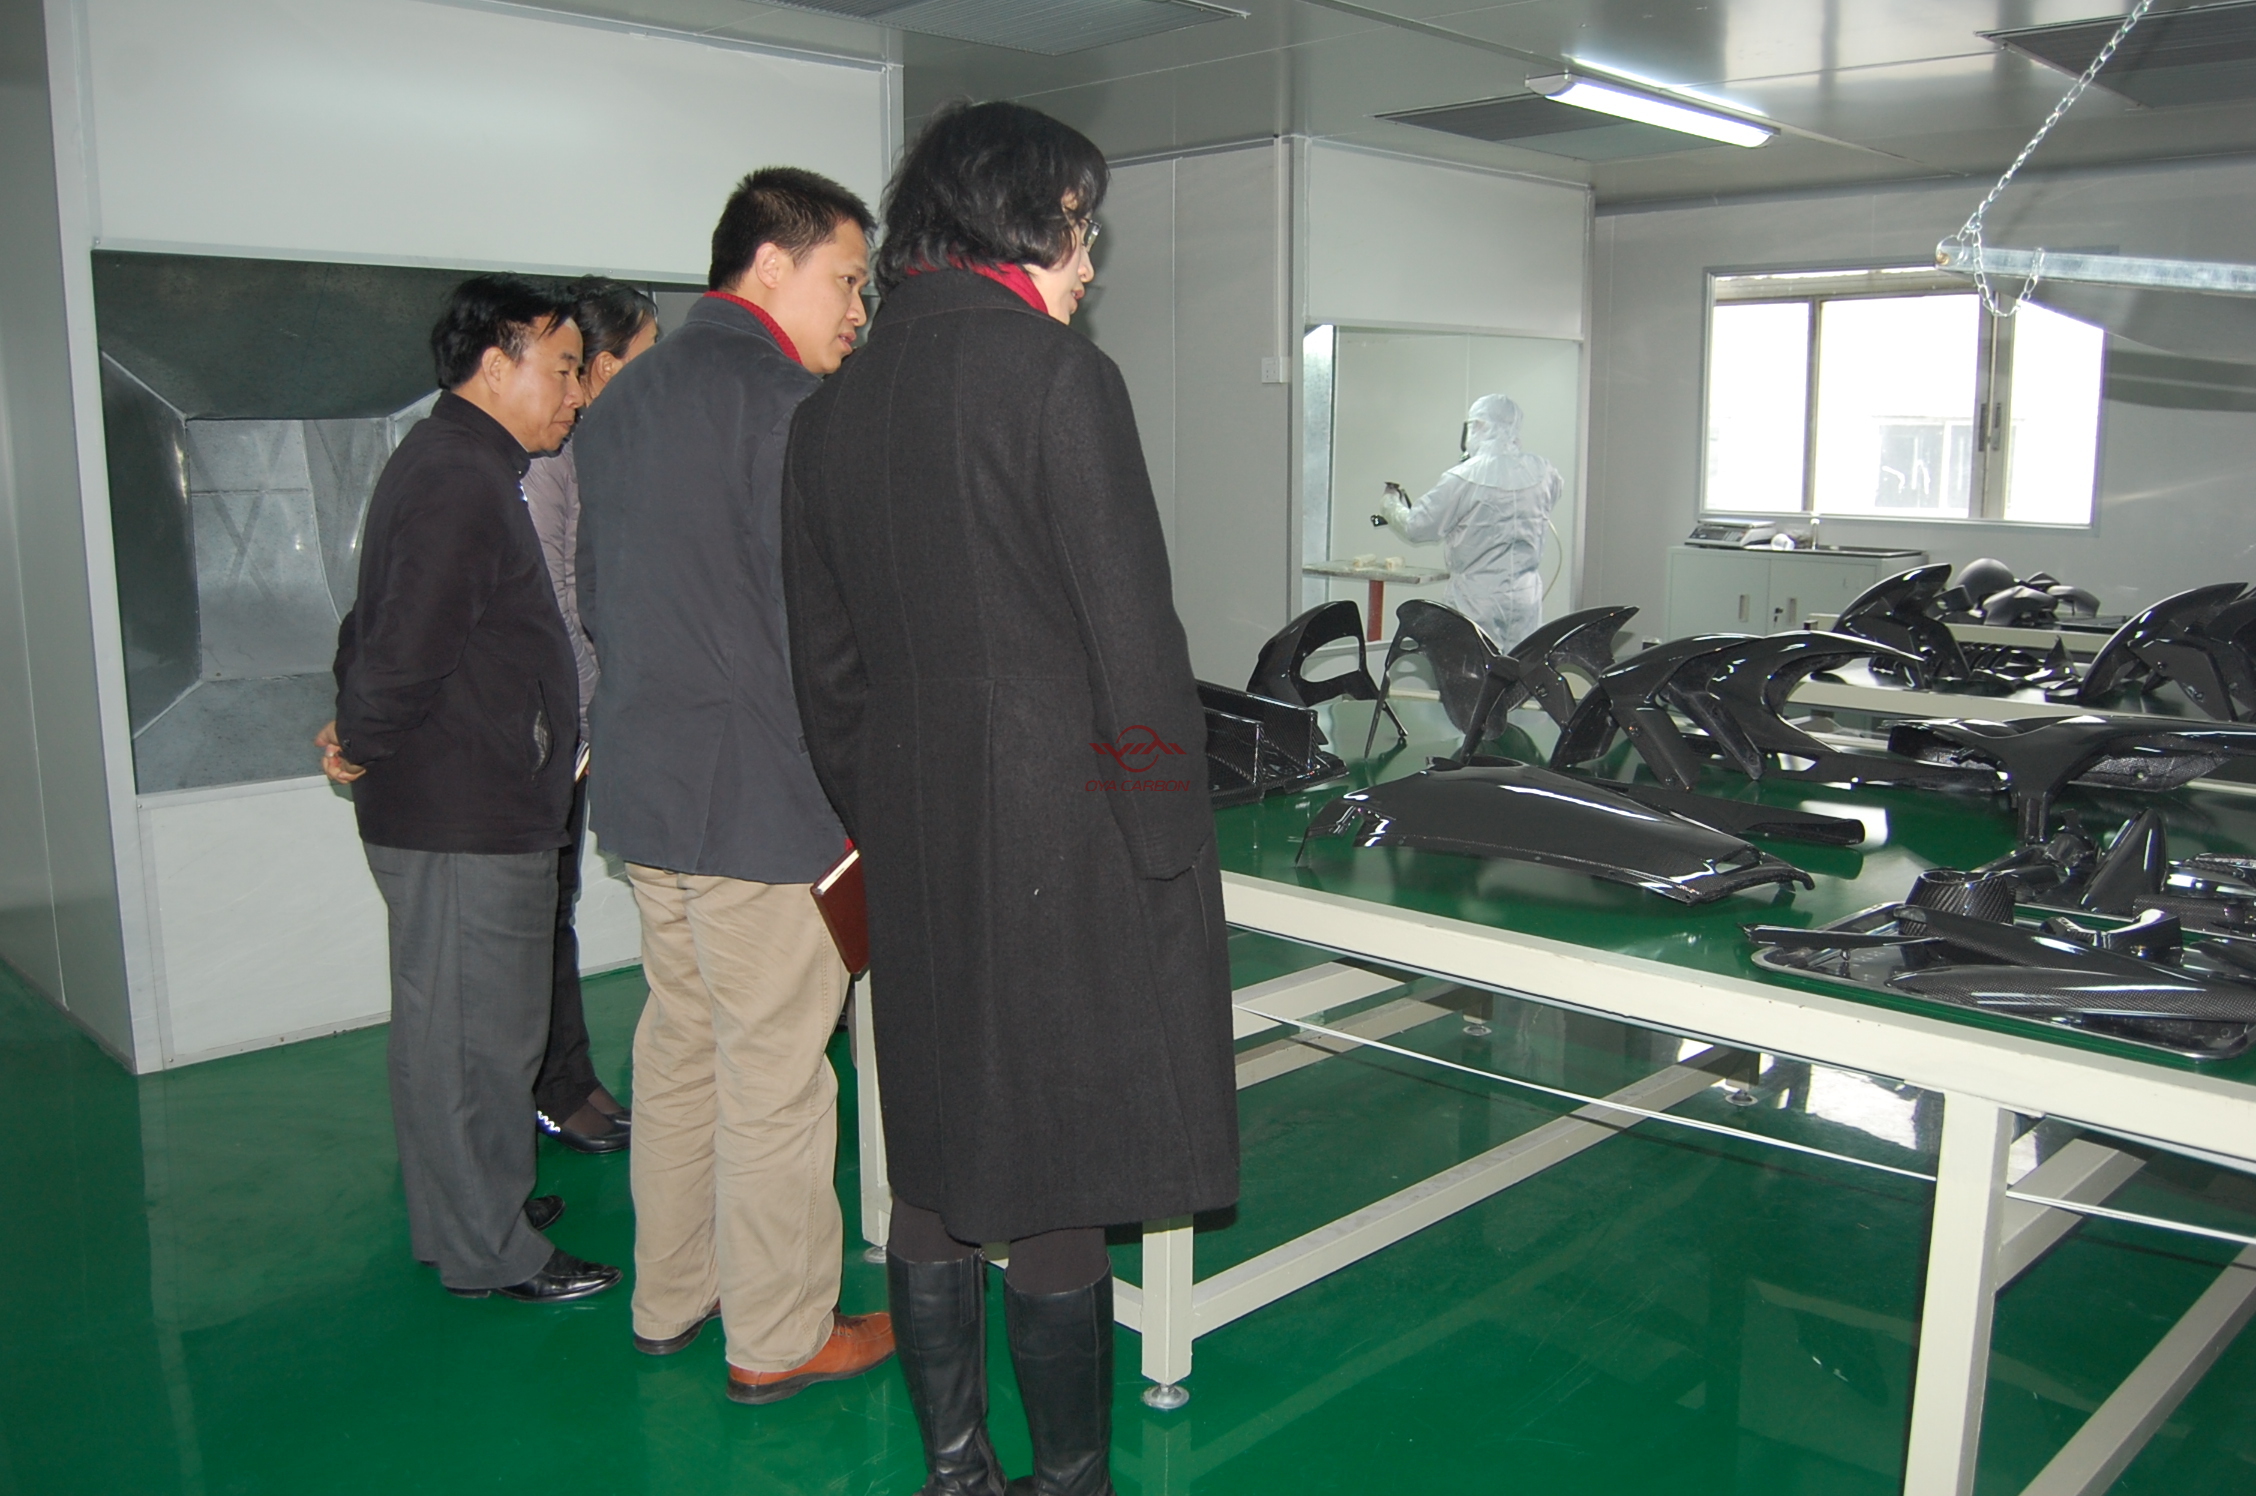 Welcome to our company, Honda Motor Co., Ltd. from Japan. 9